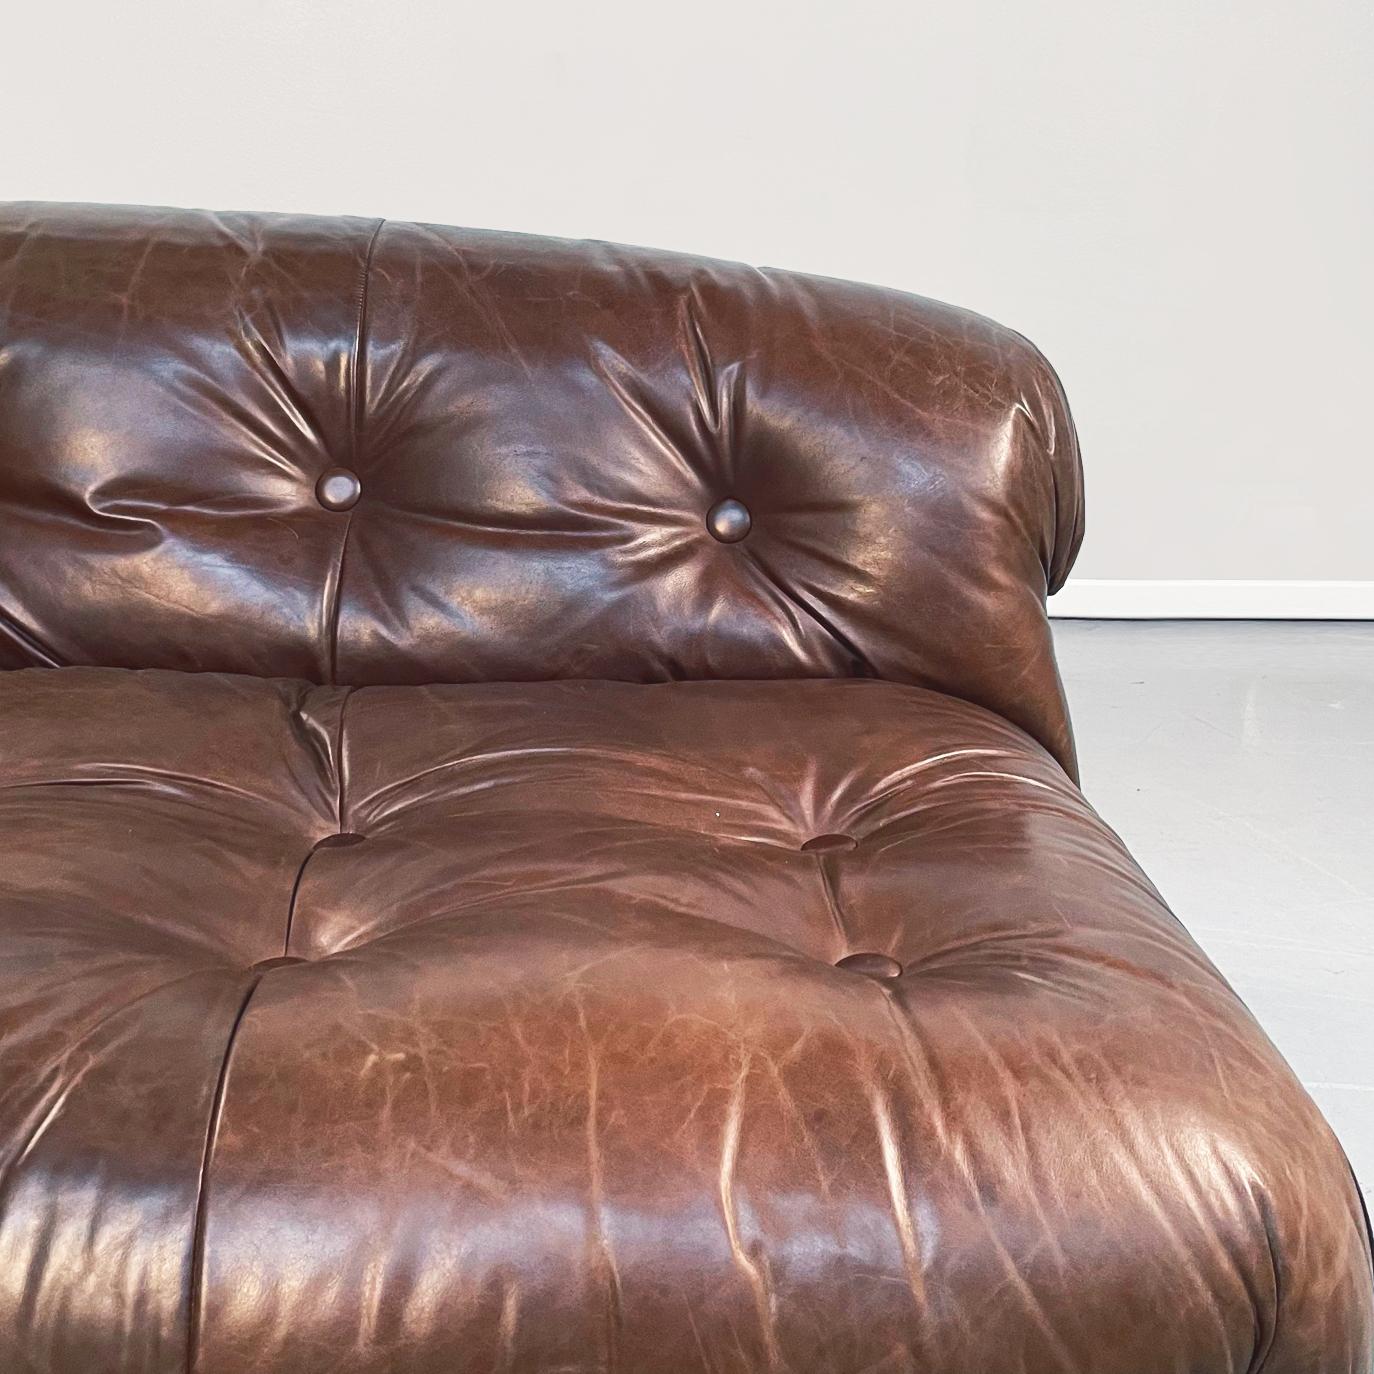 Late 20th Century Italian MidCentury Brown Leather Soriana Sofa by Afra Tobia Scarpa Cassina, 1970 For Sale